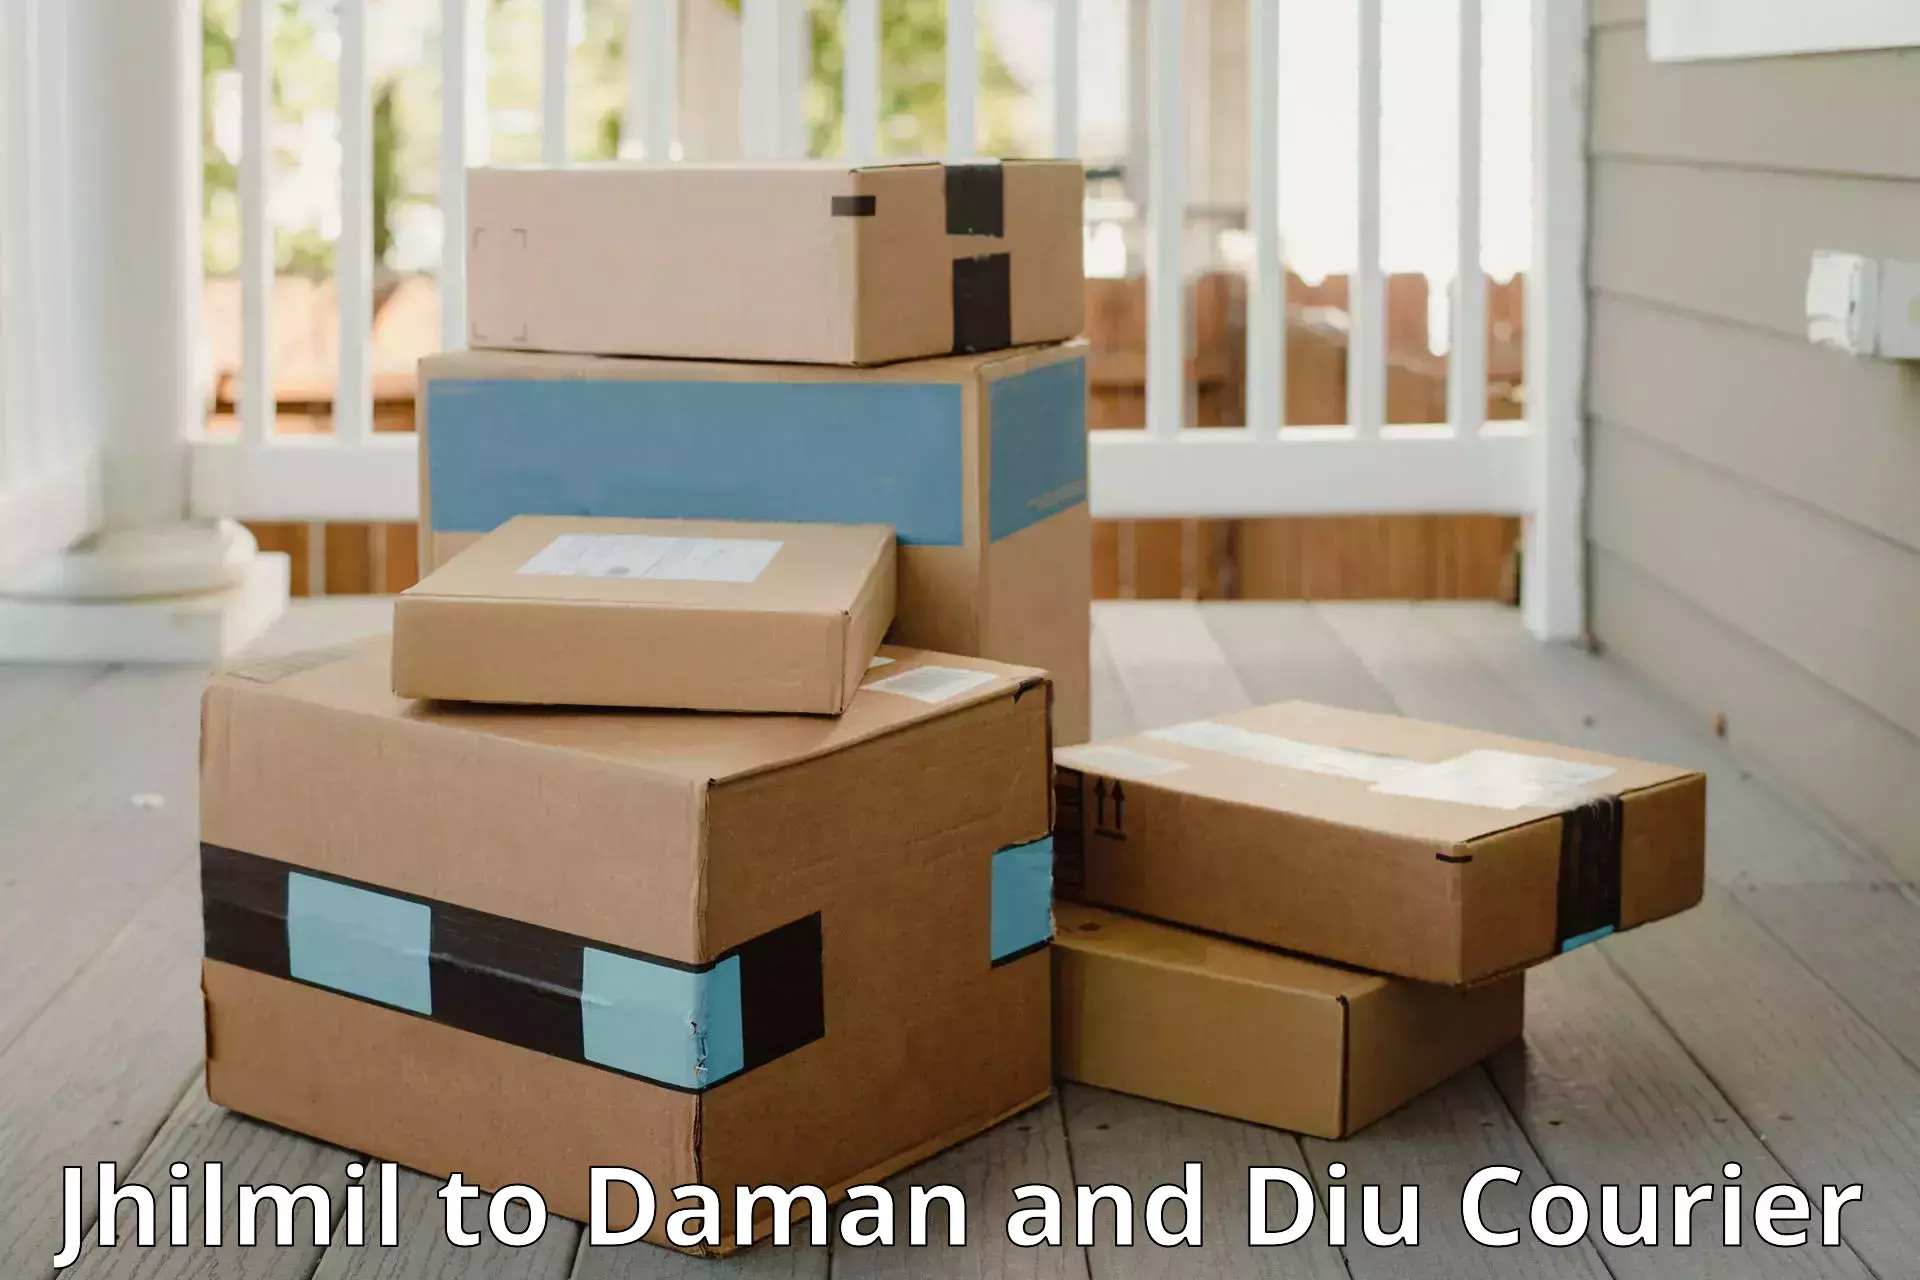 Same day luggage service Jhilmil to Daman and Diu